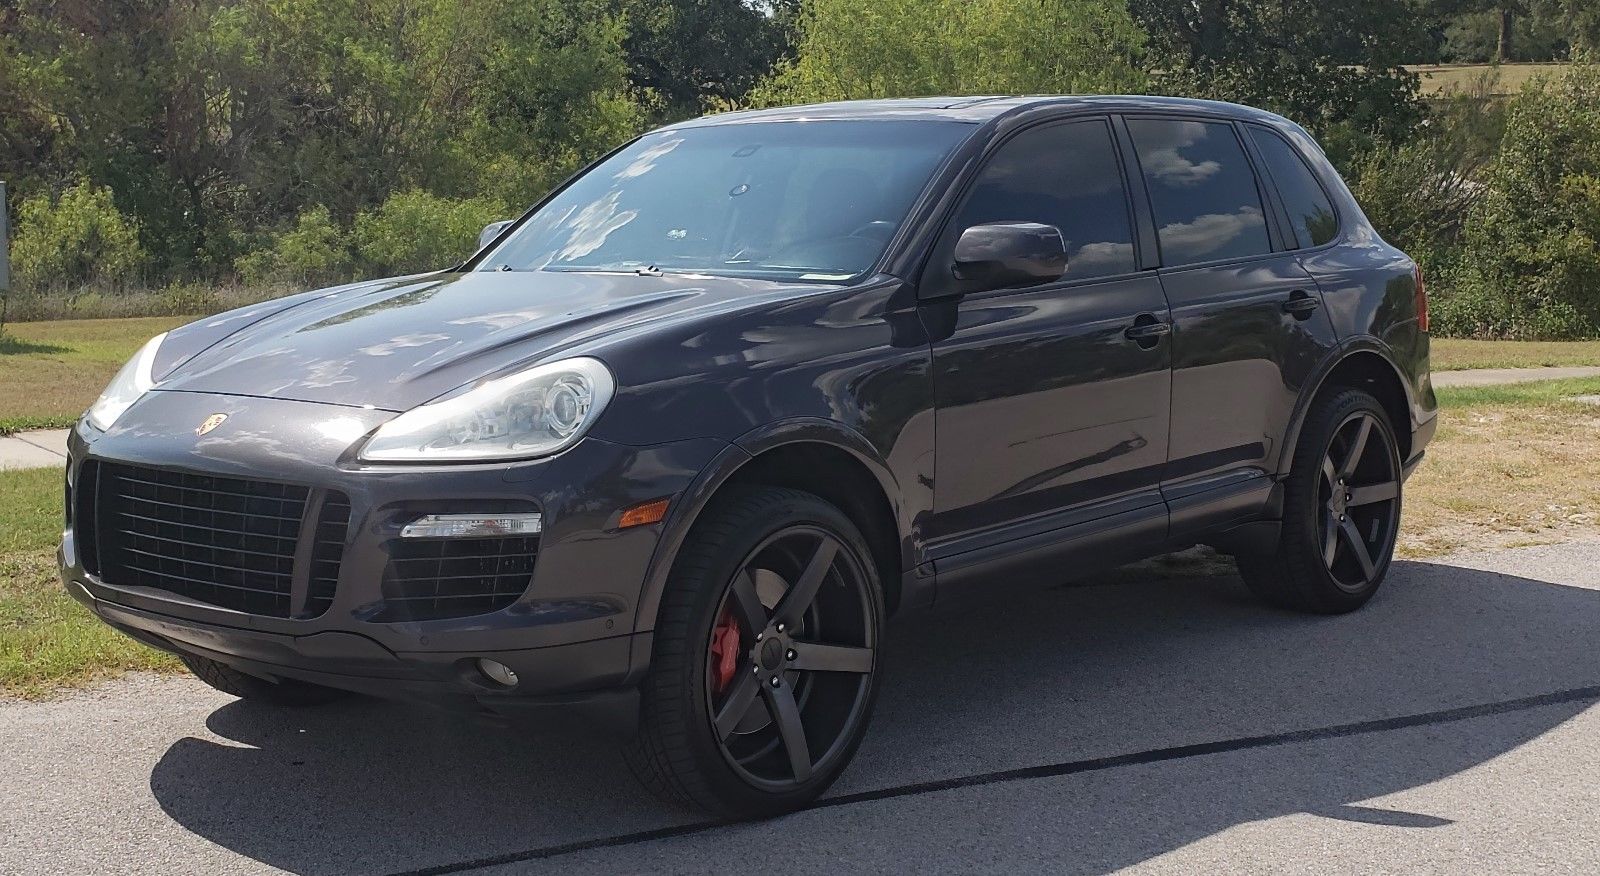 Used 09 Porsche Cayenne Turbo S 09 Porsche Cayenne Turbo S 550hp 17 18 Is In Stock And For Sale 24carshop Com